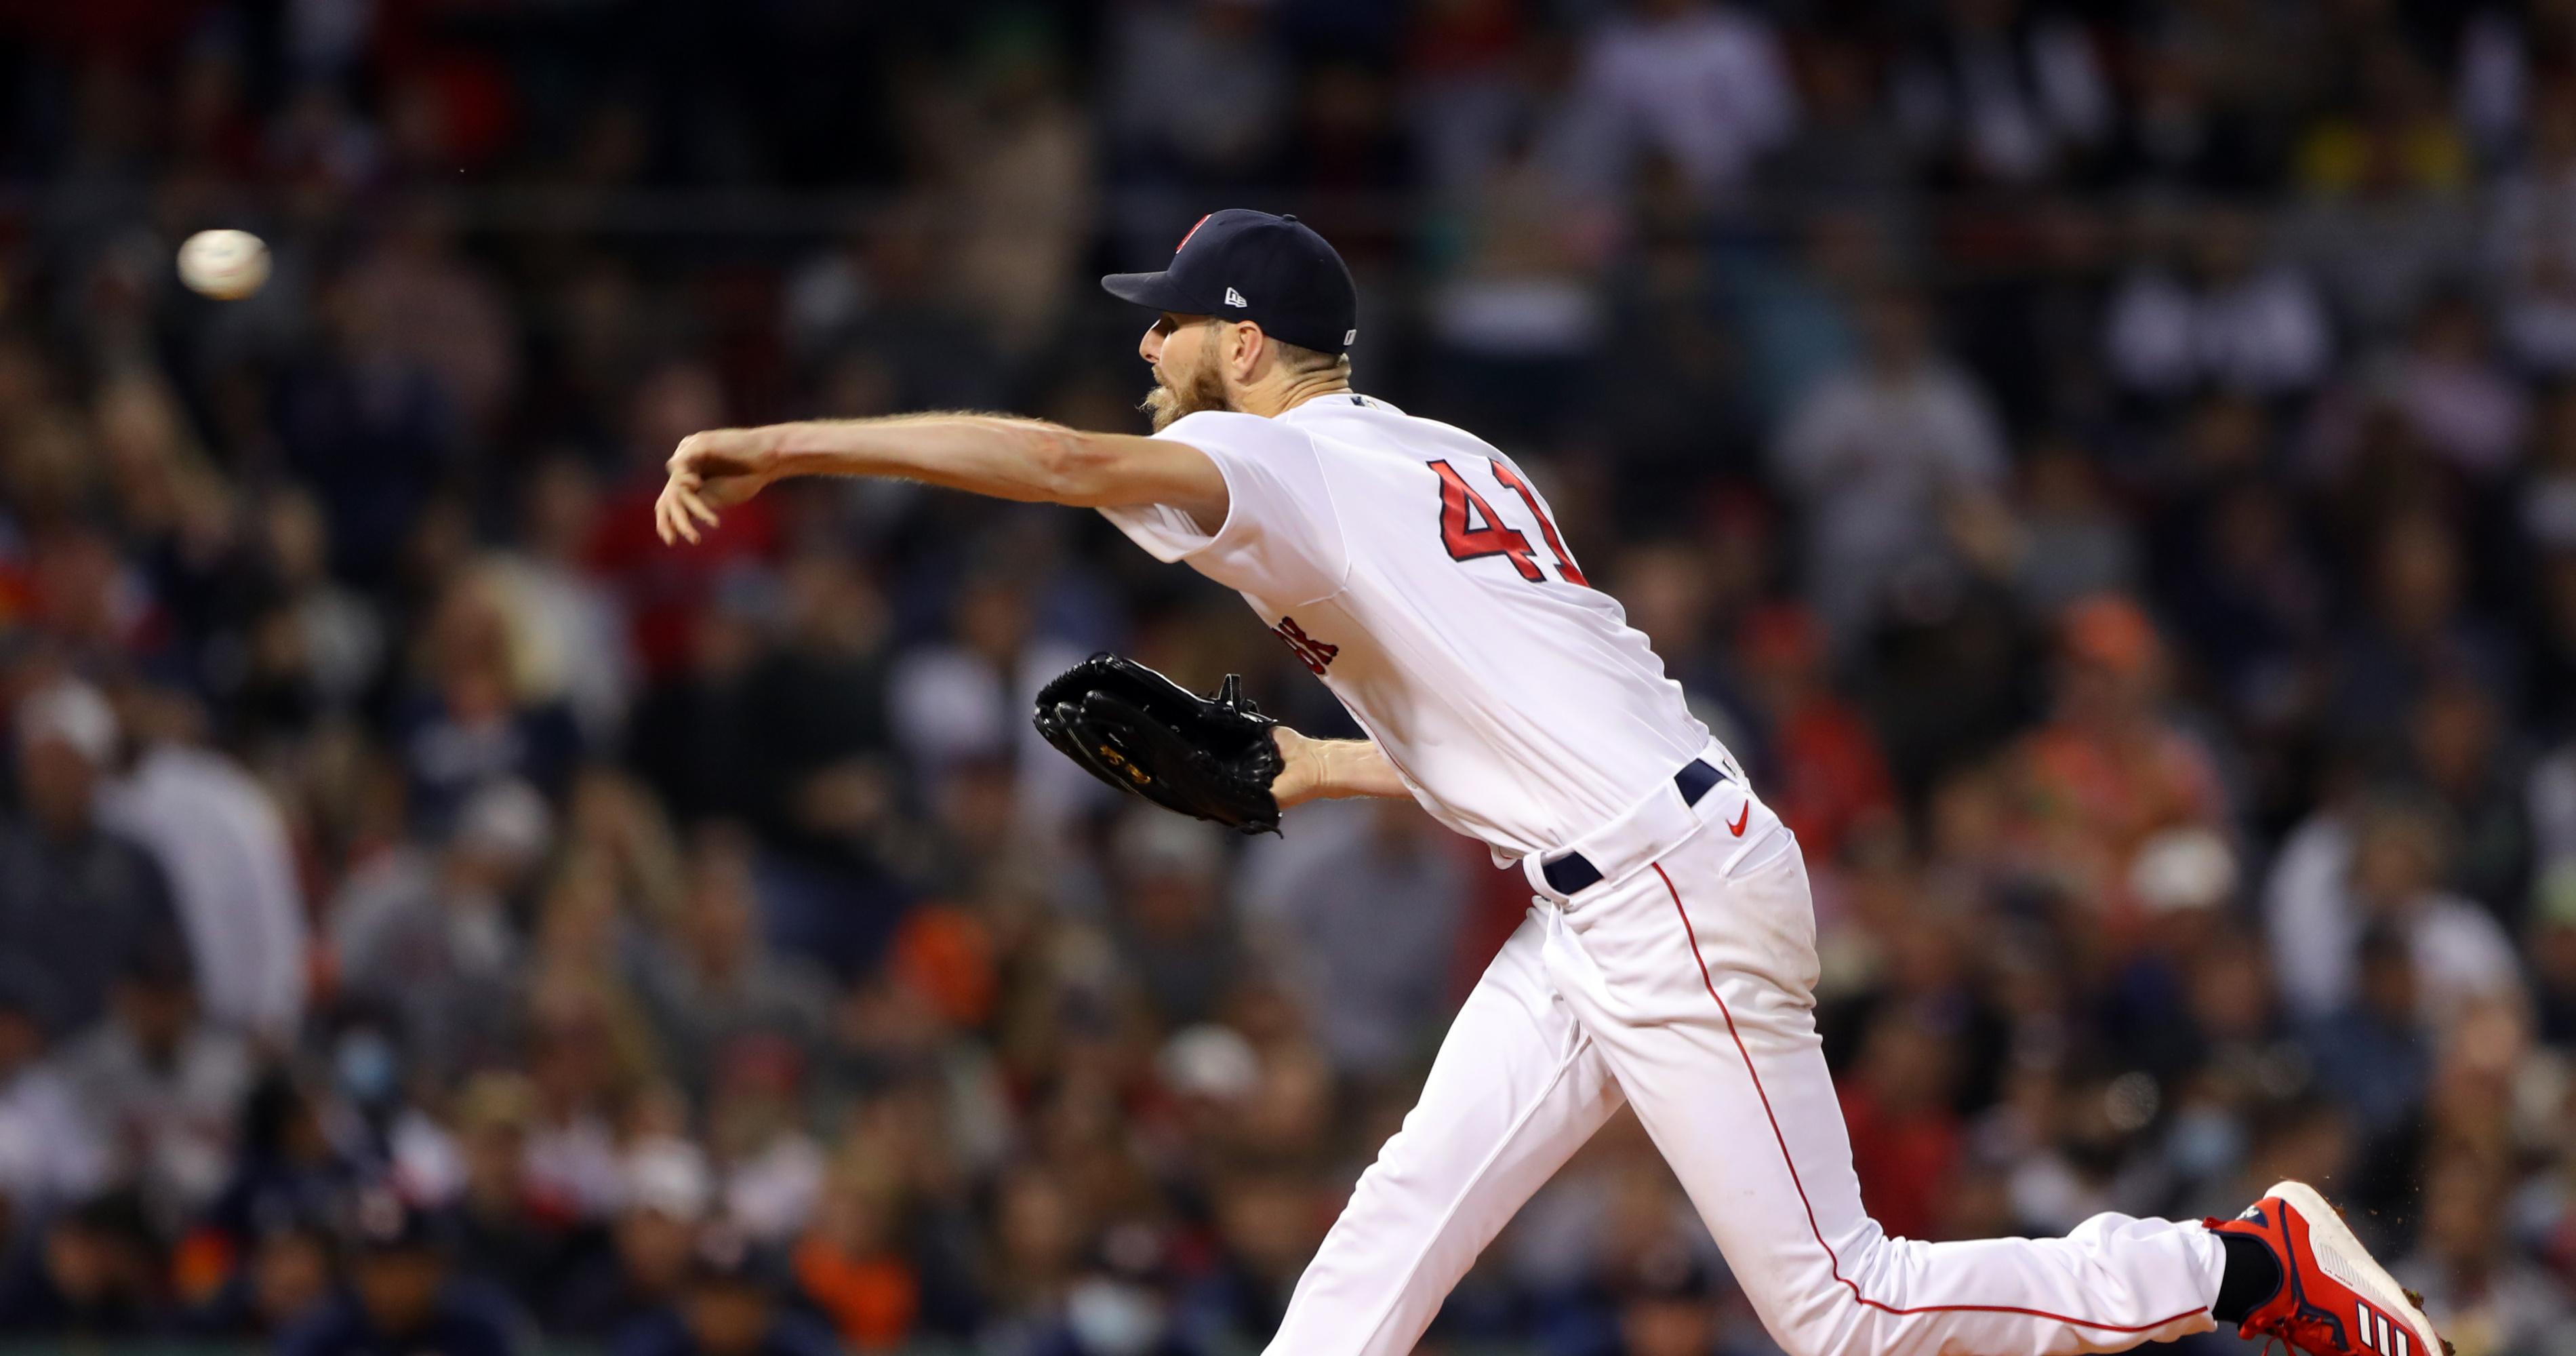 Chris Sale undergoes second MRI and resumes throwing